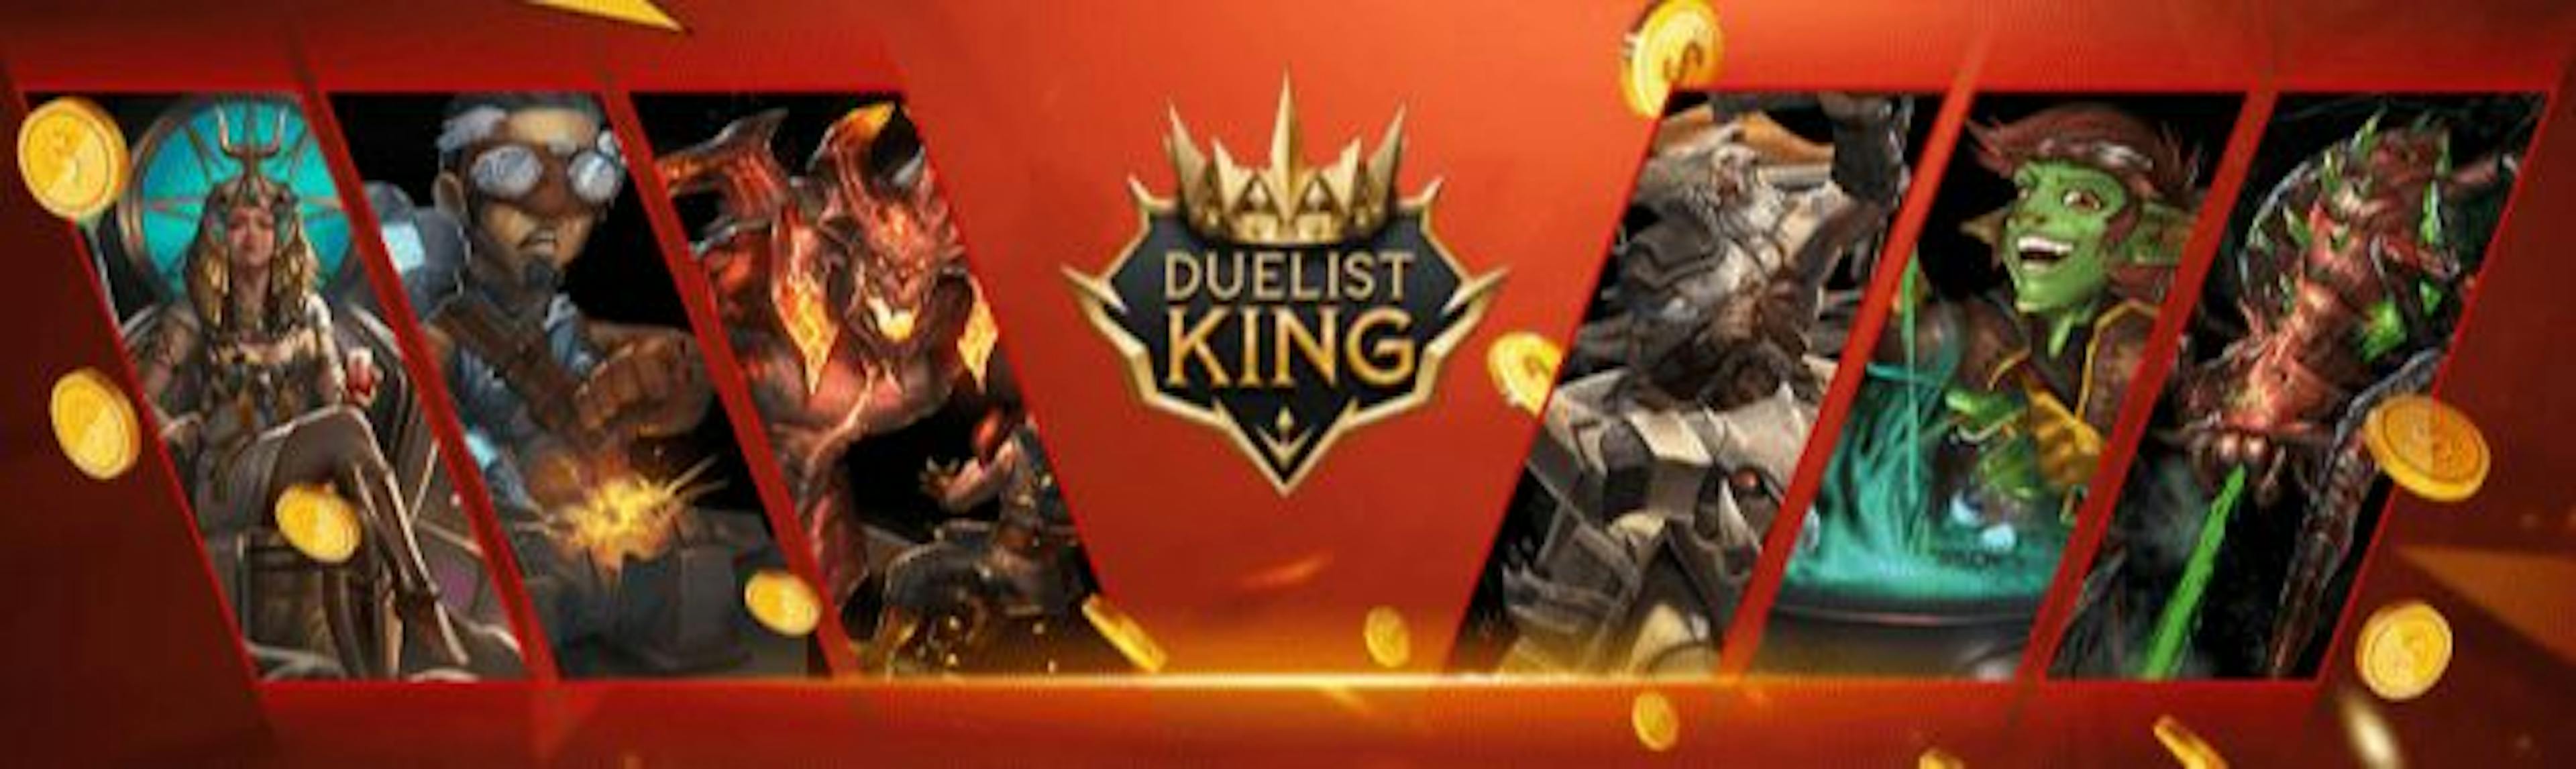 /duelist-king-nominated-as-blockchain-game-dev-of-the-year feature image